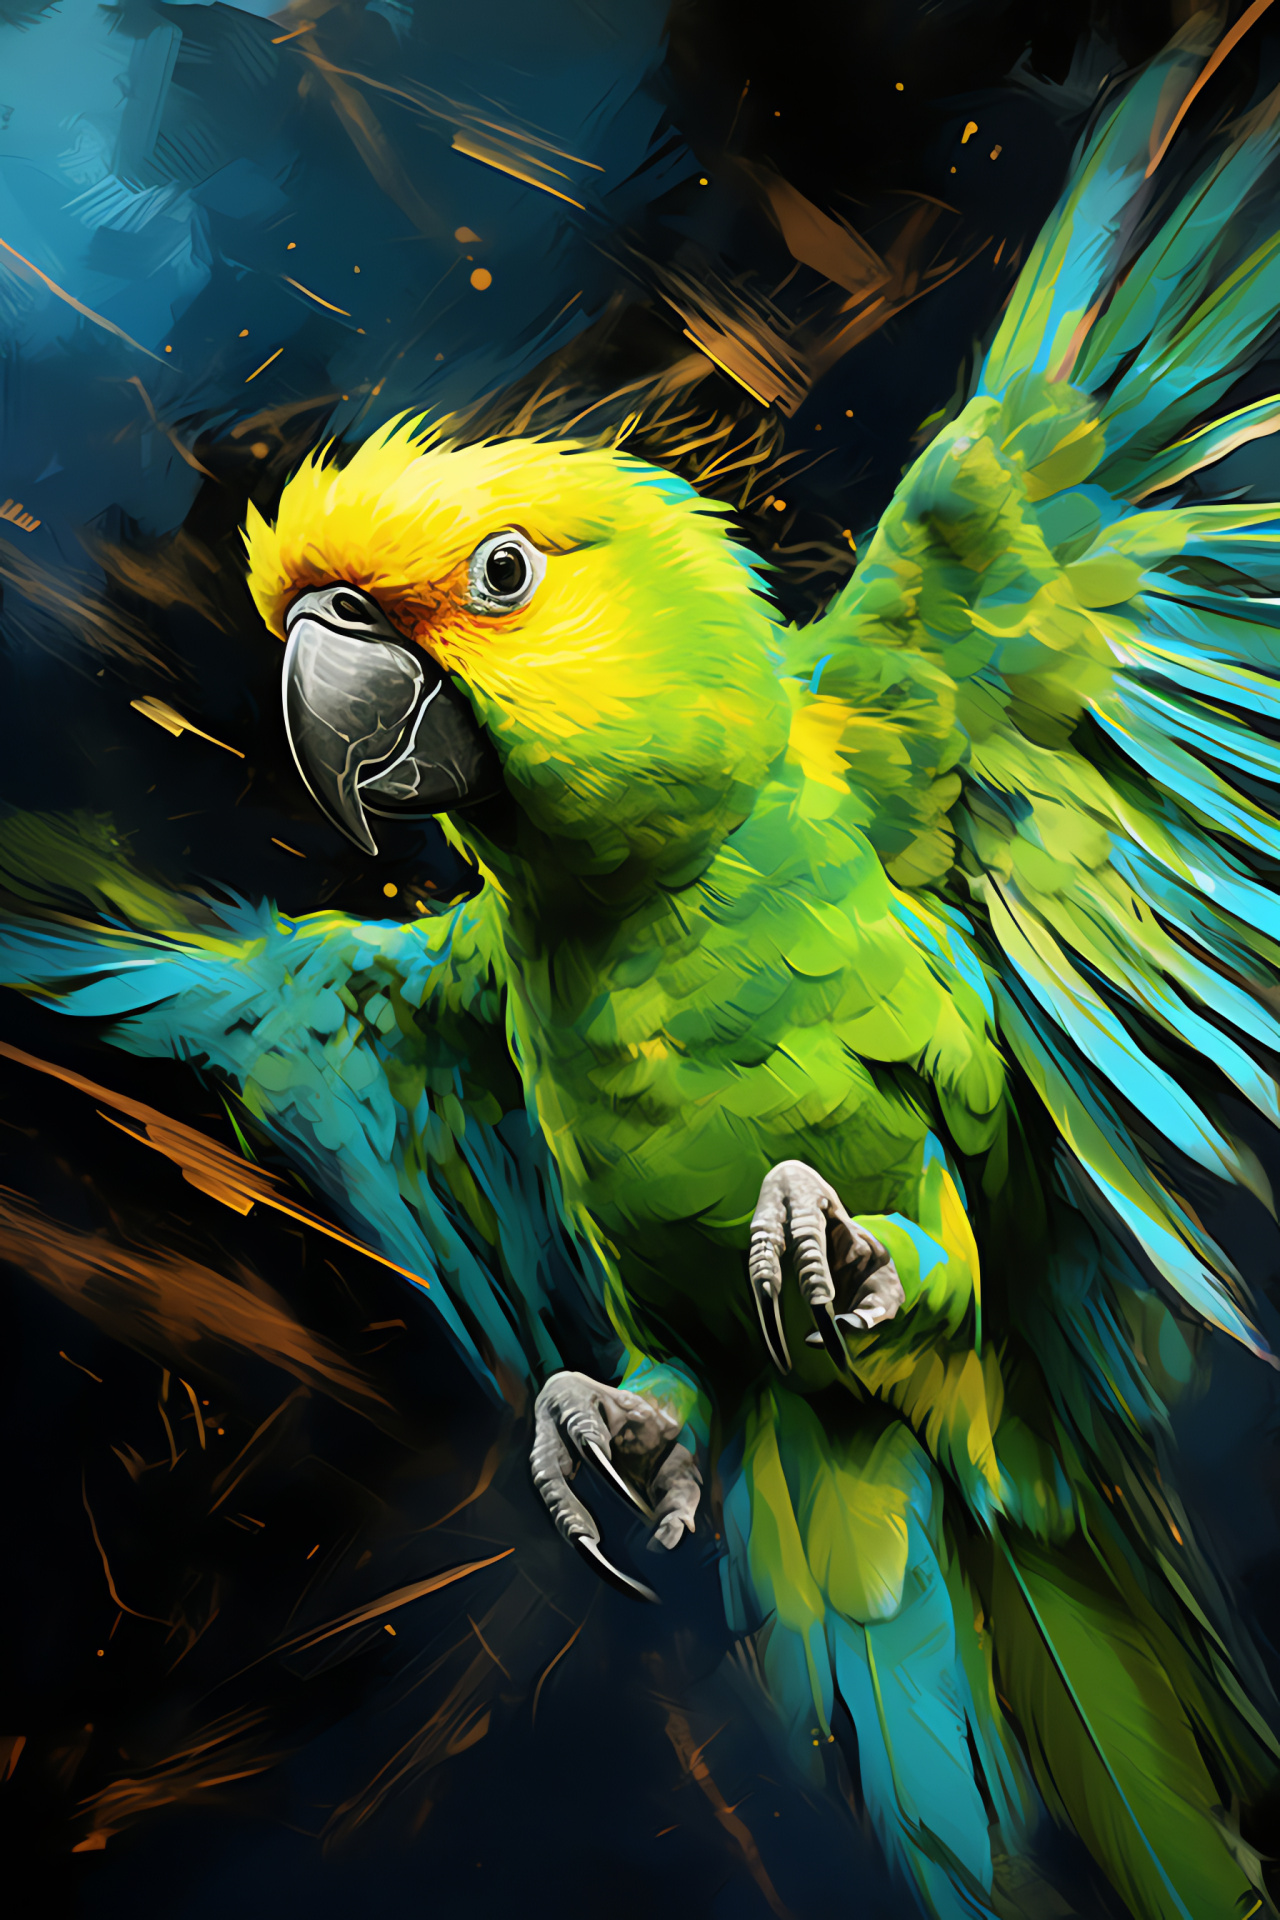 Yellow-Naped Amazon, Lush green plumage, Yellow feather highlights, Parrot in aviary, Black eyed gaze, HD Phone Wallpaper